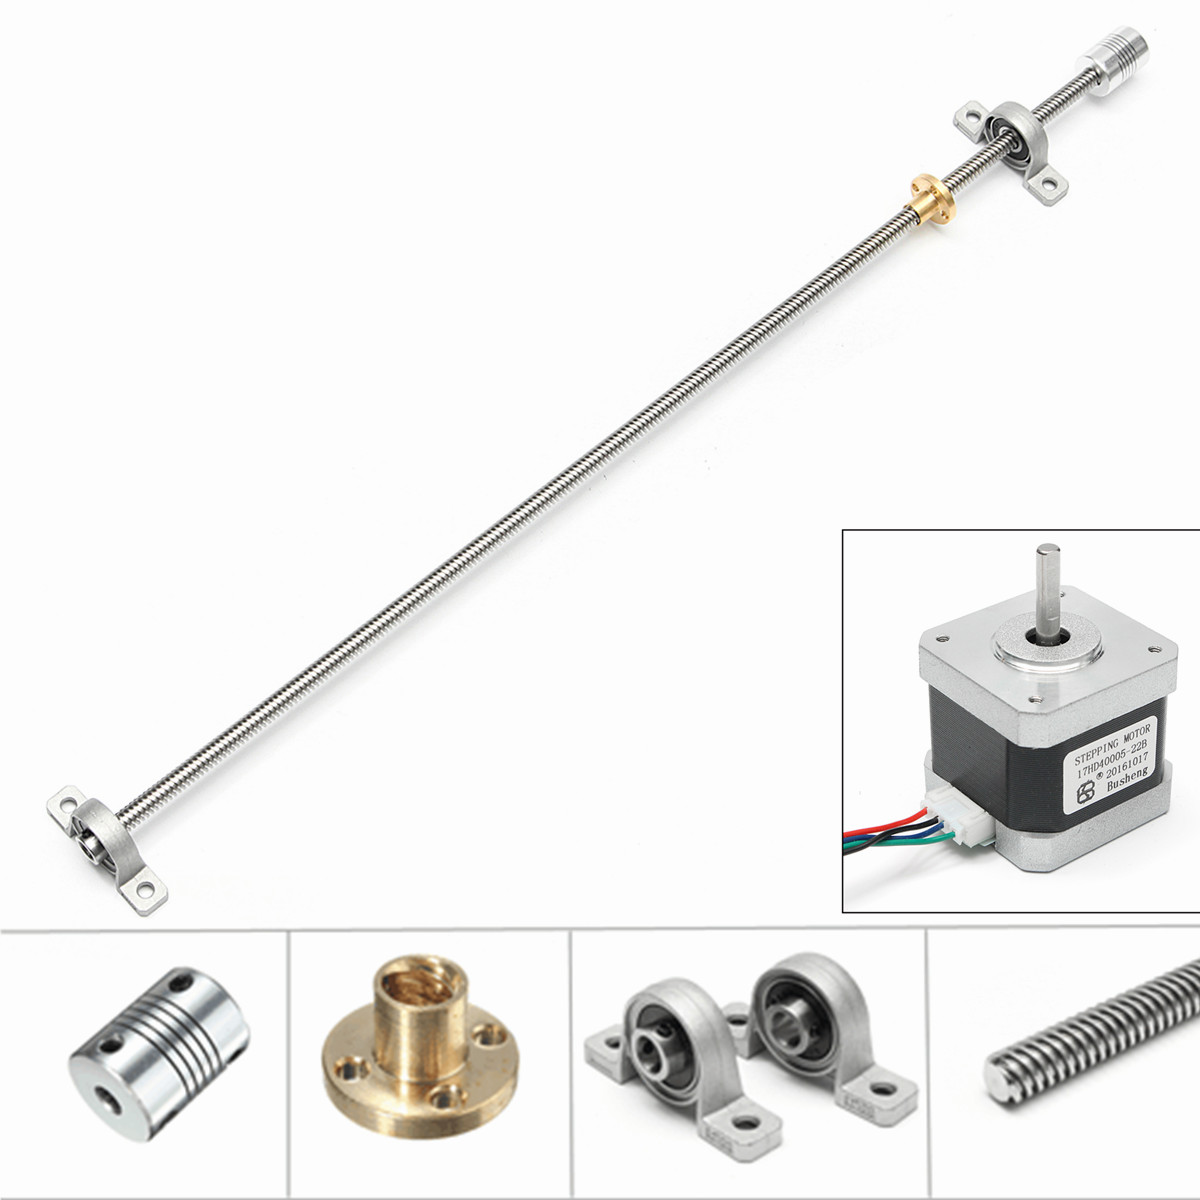 T8 600mm Stainless Steel Lead Screw Coupling Shaft Mounting + Motor For 3D Printer 8